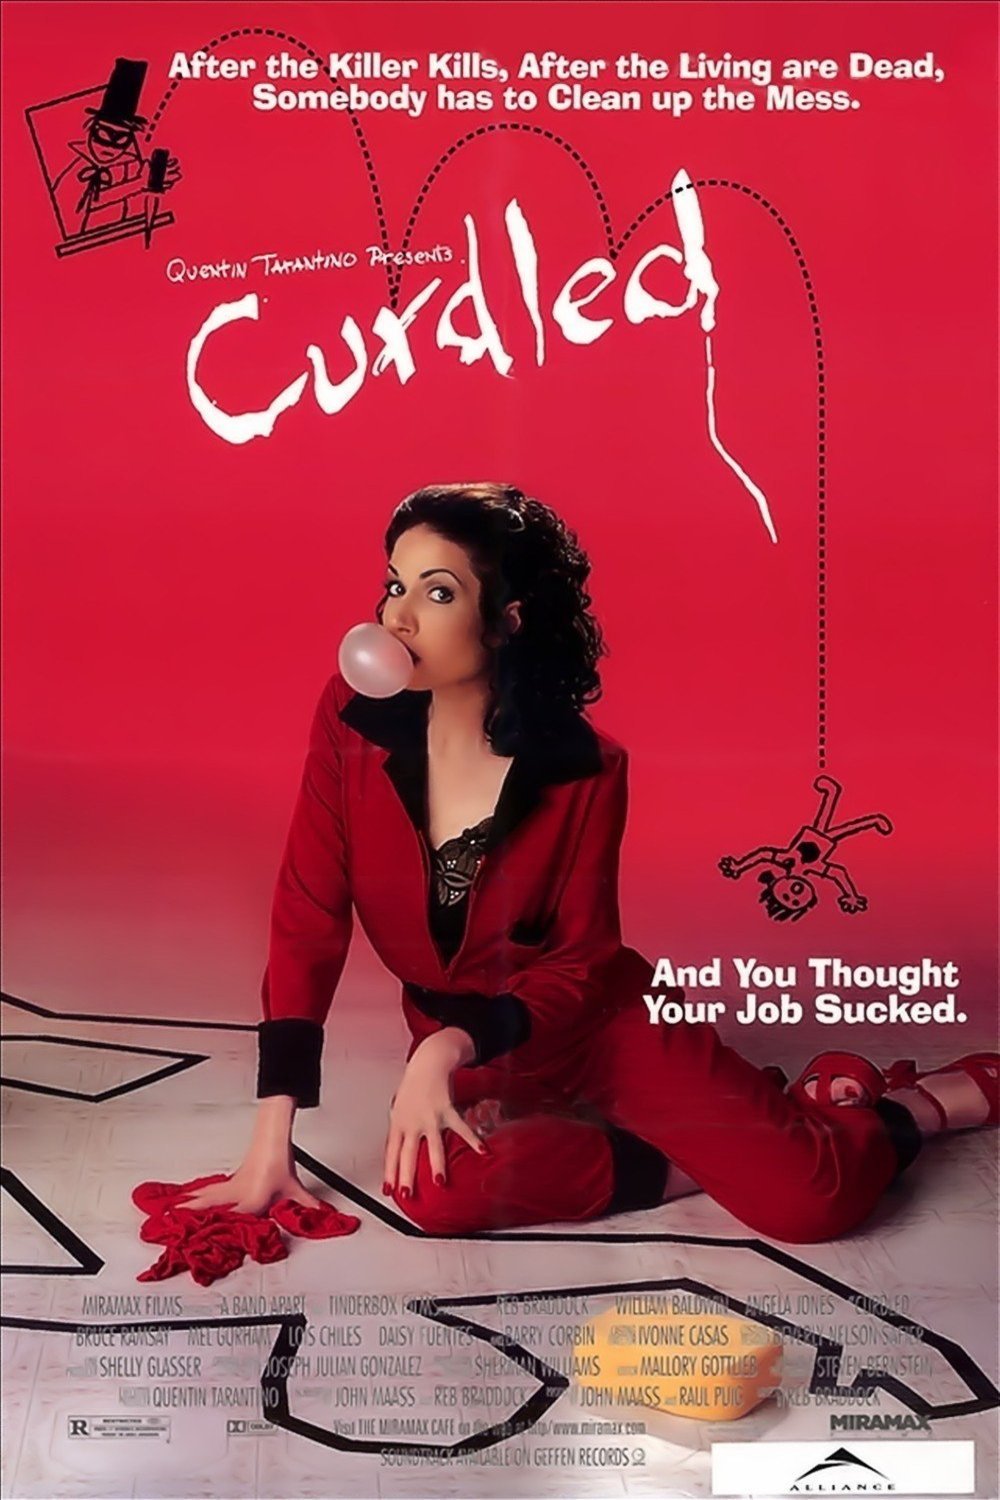 Poster of the movie Curdled